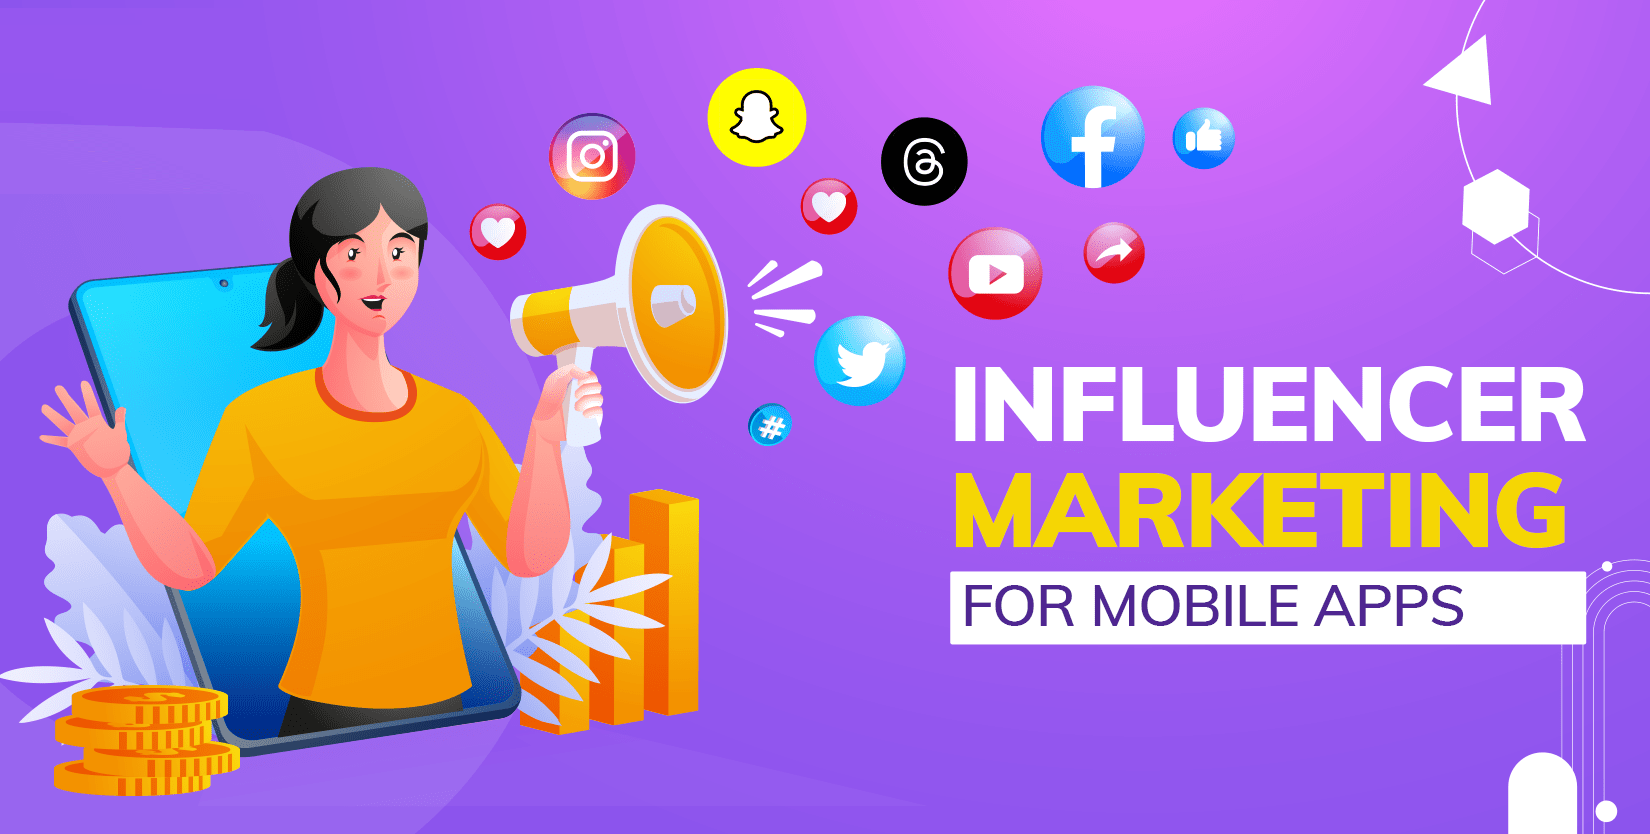 cost per install mobile advertising, mobile cost per install, mobile app cost per install, cost per install mobile, mobile app advertising costs, pay per install mobile app, cpi mobile apps, mobile app influencer marketing, cpi mobile app, cpi mobile advertising